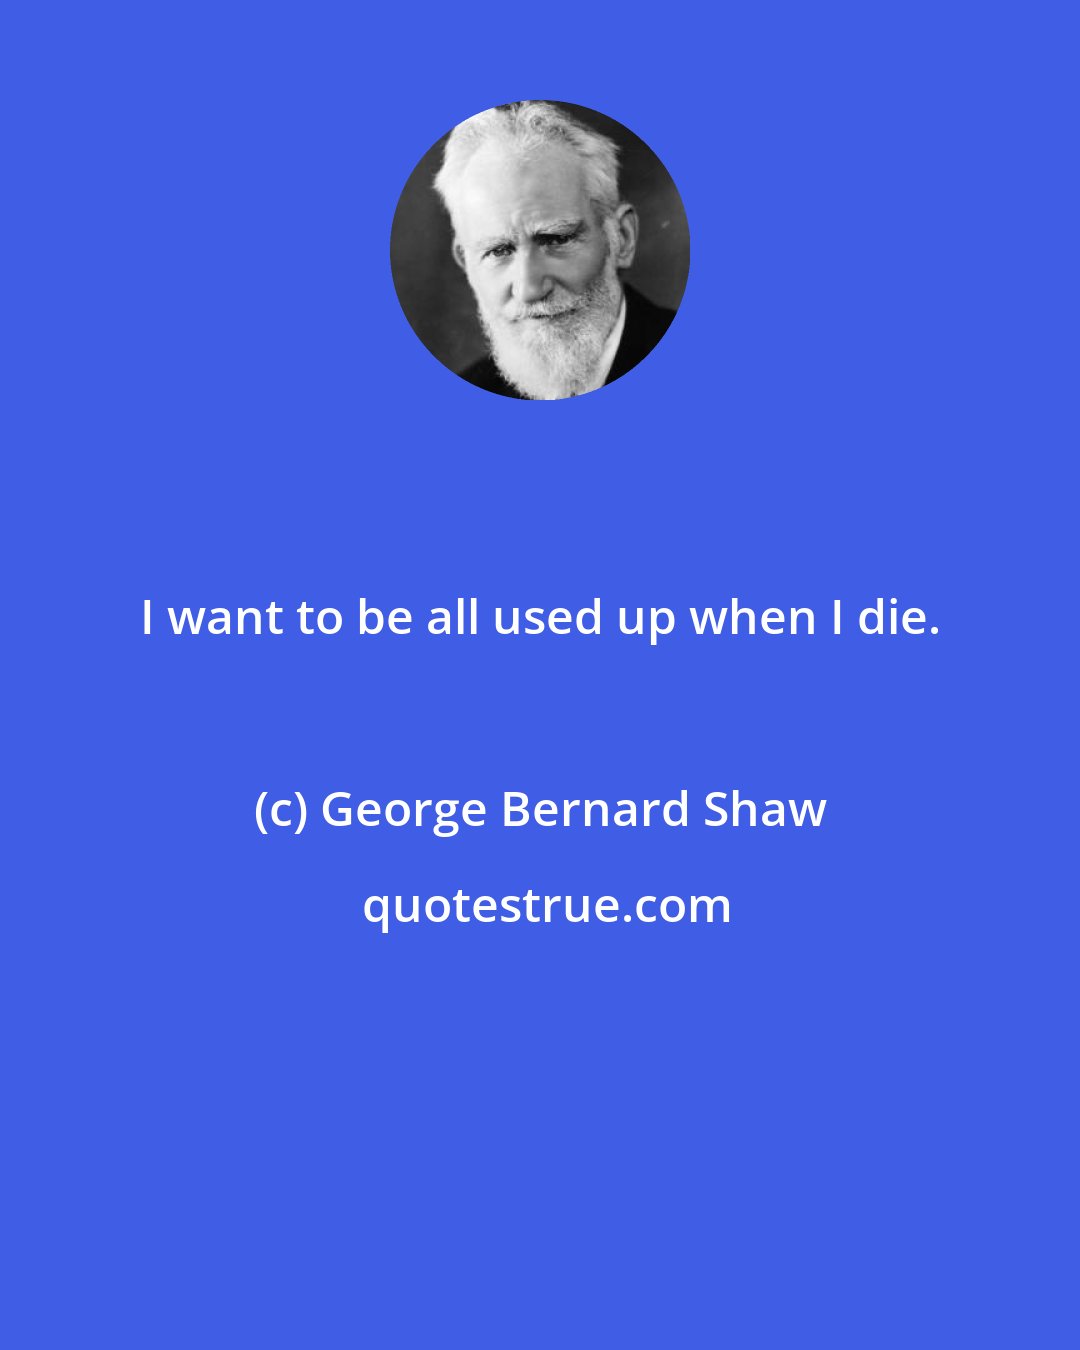 George Bernard Shaw: I want to be all used up when I die.